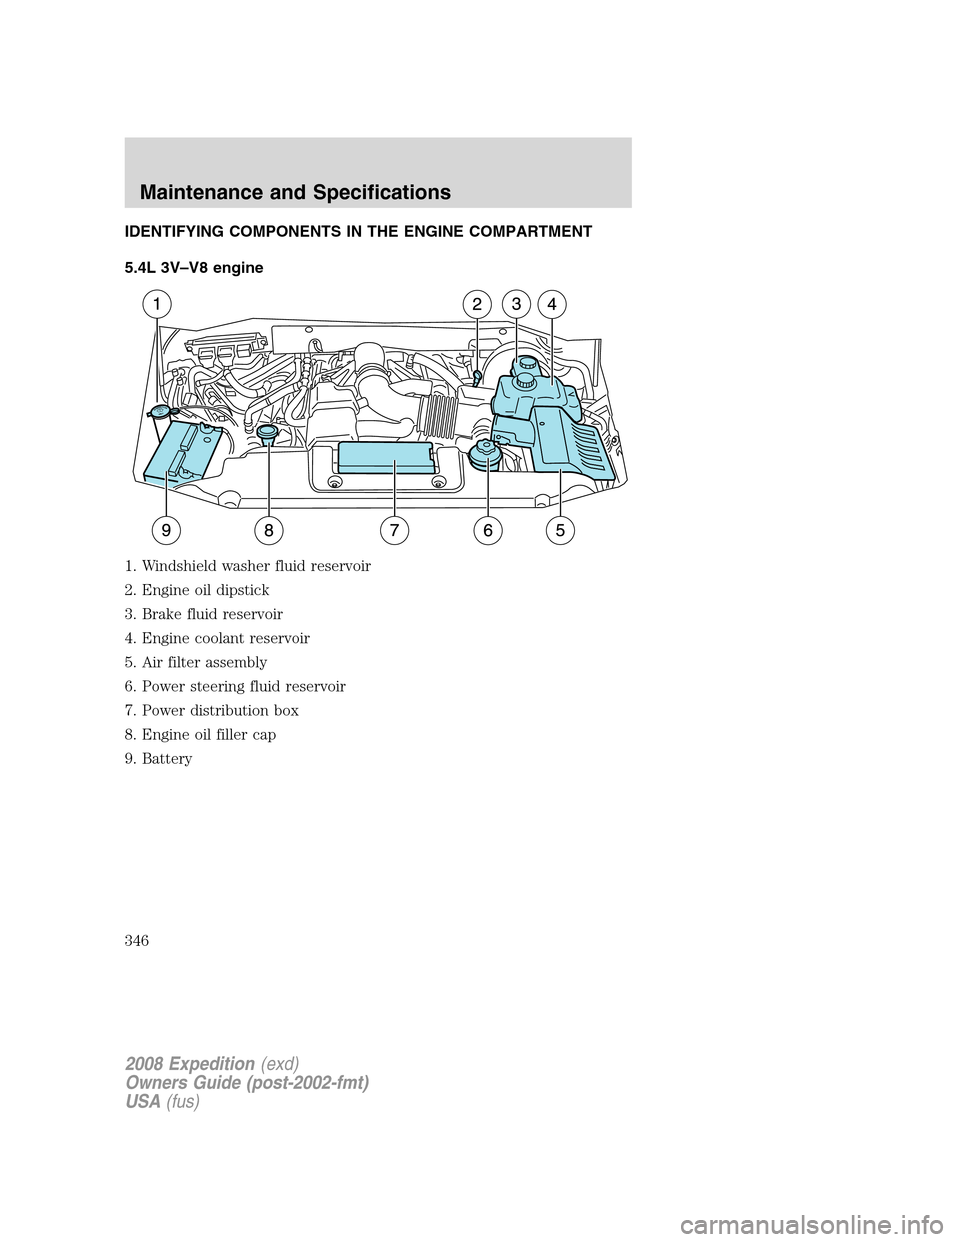 FORD EXPEDITION 2008 3.G Owners Manual IDENTIFYING COMPONENTS IN THE ENGINE COMPARTMENT
5.4L 3V–V8 engine
1. Windshield washer fluid reservoir
2. Engine oil dipstick
3. Brake fluid reservoir
4. Engine coolant reservoir
5. Air filter asse